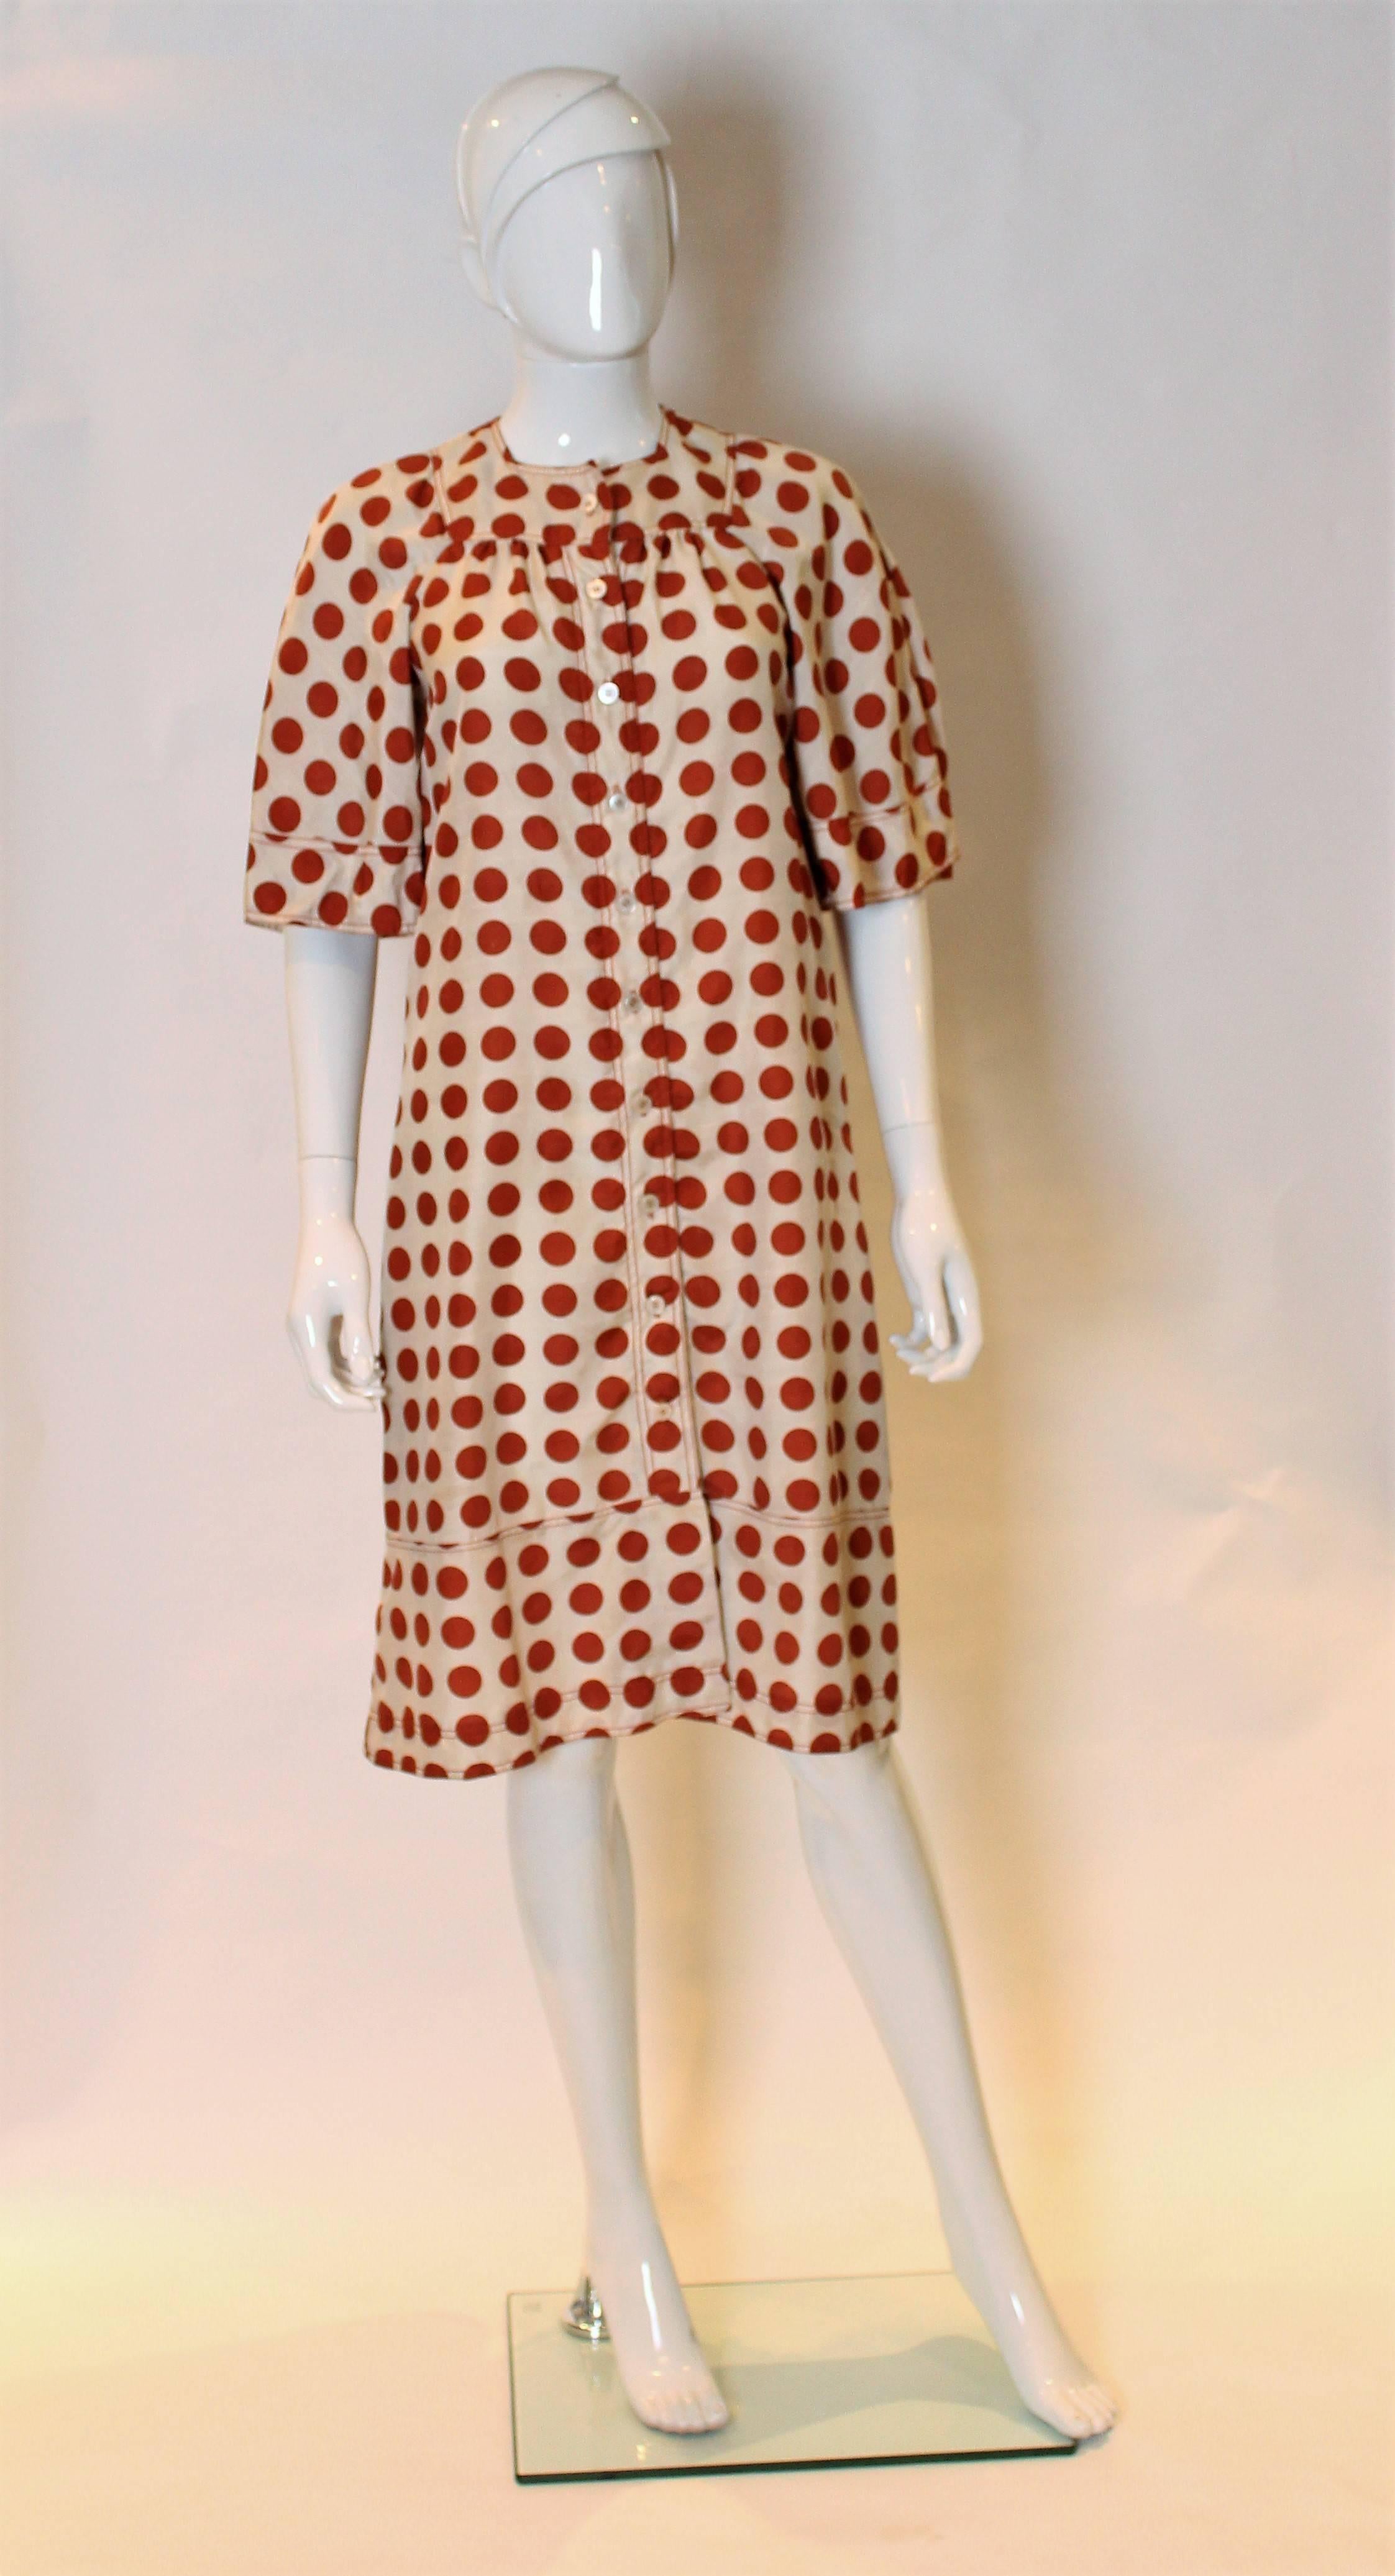 A cute dress by Jean Muir, made for Harrods, London. The dress is made of sik and has an ivory background with brown polka dots. It has short angel like sleeves, a button through front, and is slightly flared at the hem. There are belt loops,but